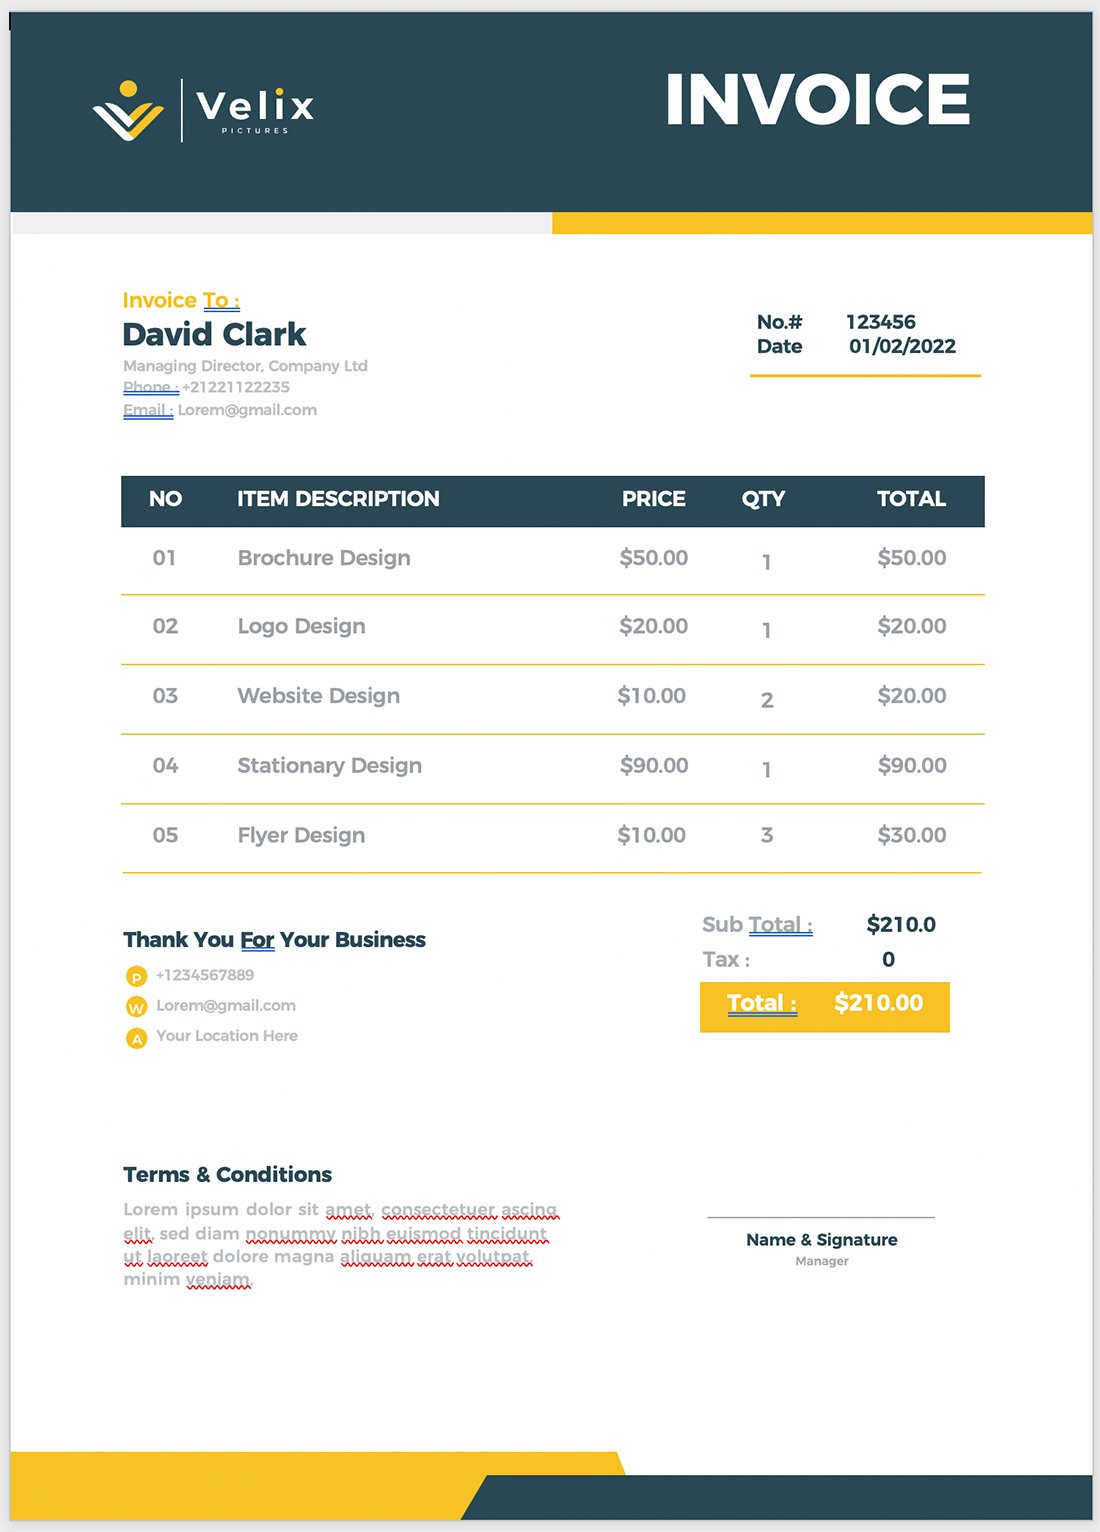 How to Create an Invoice in Word (In 3 Simple Steps!) Yes Web Designs